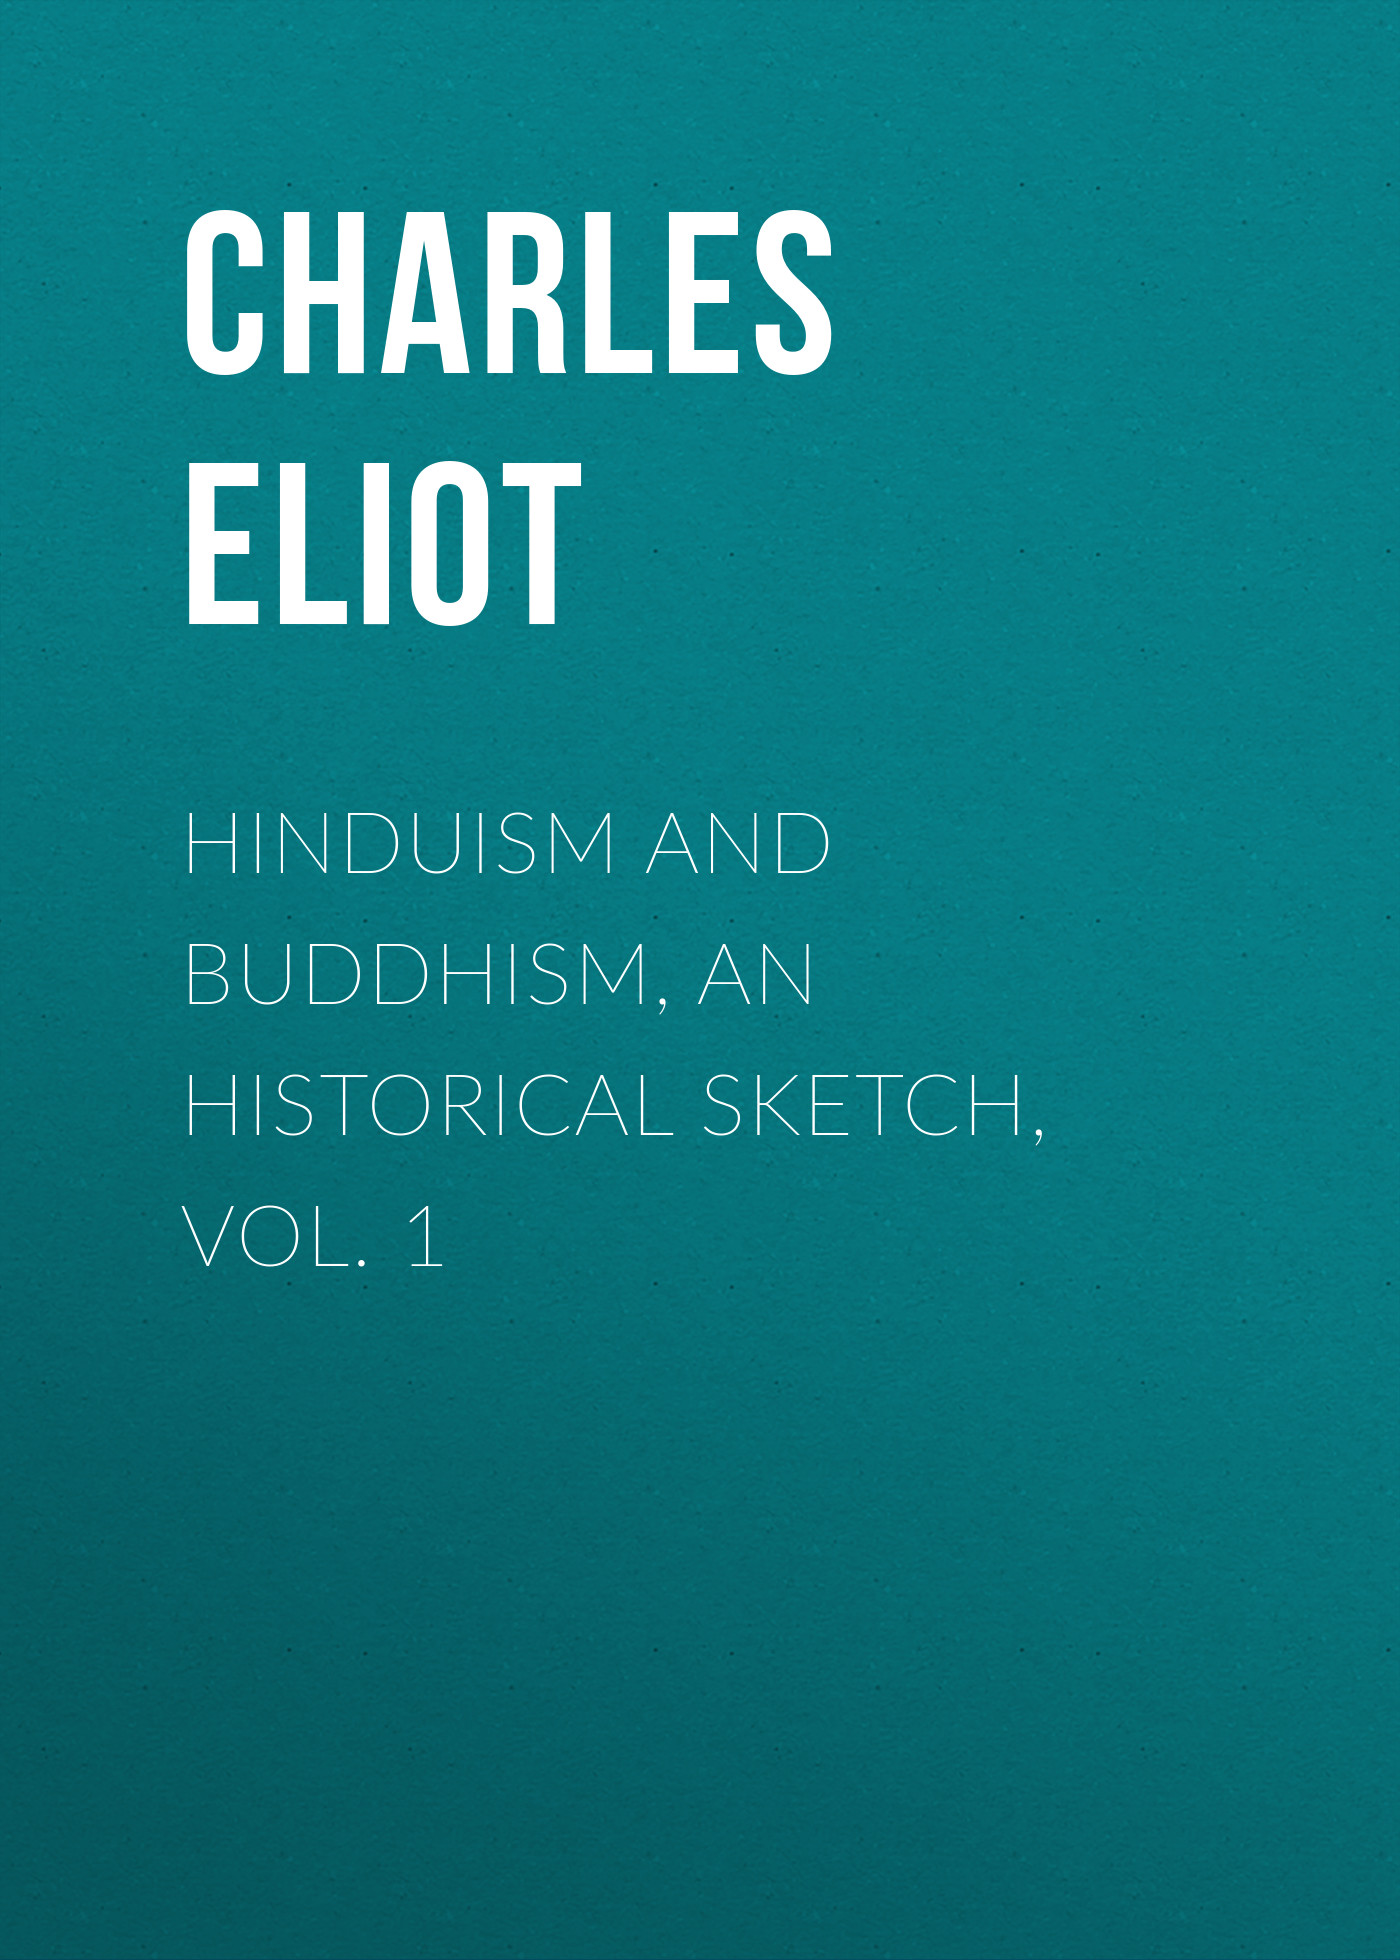 Hinduism and Buddhism, An Historical Sketch, Vol. 1